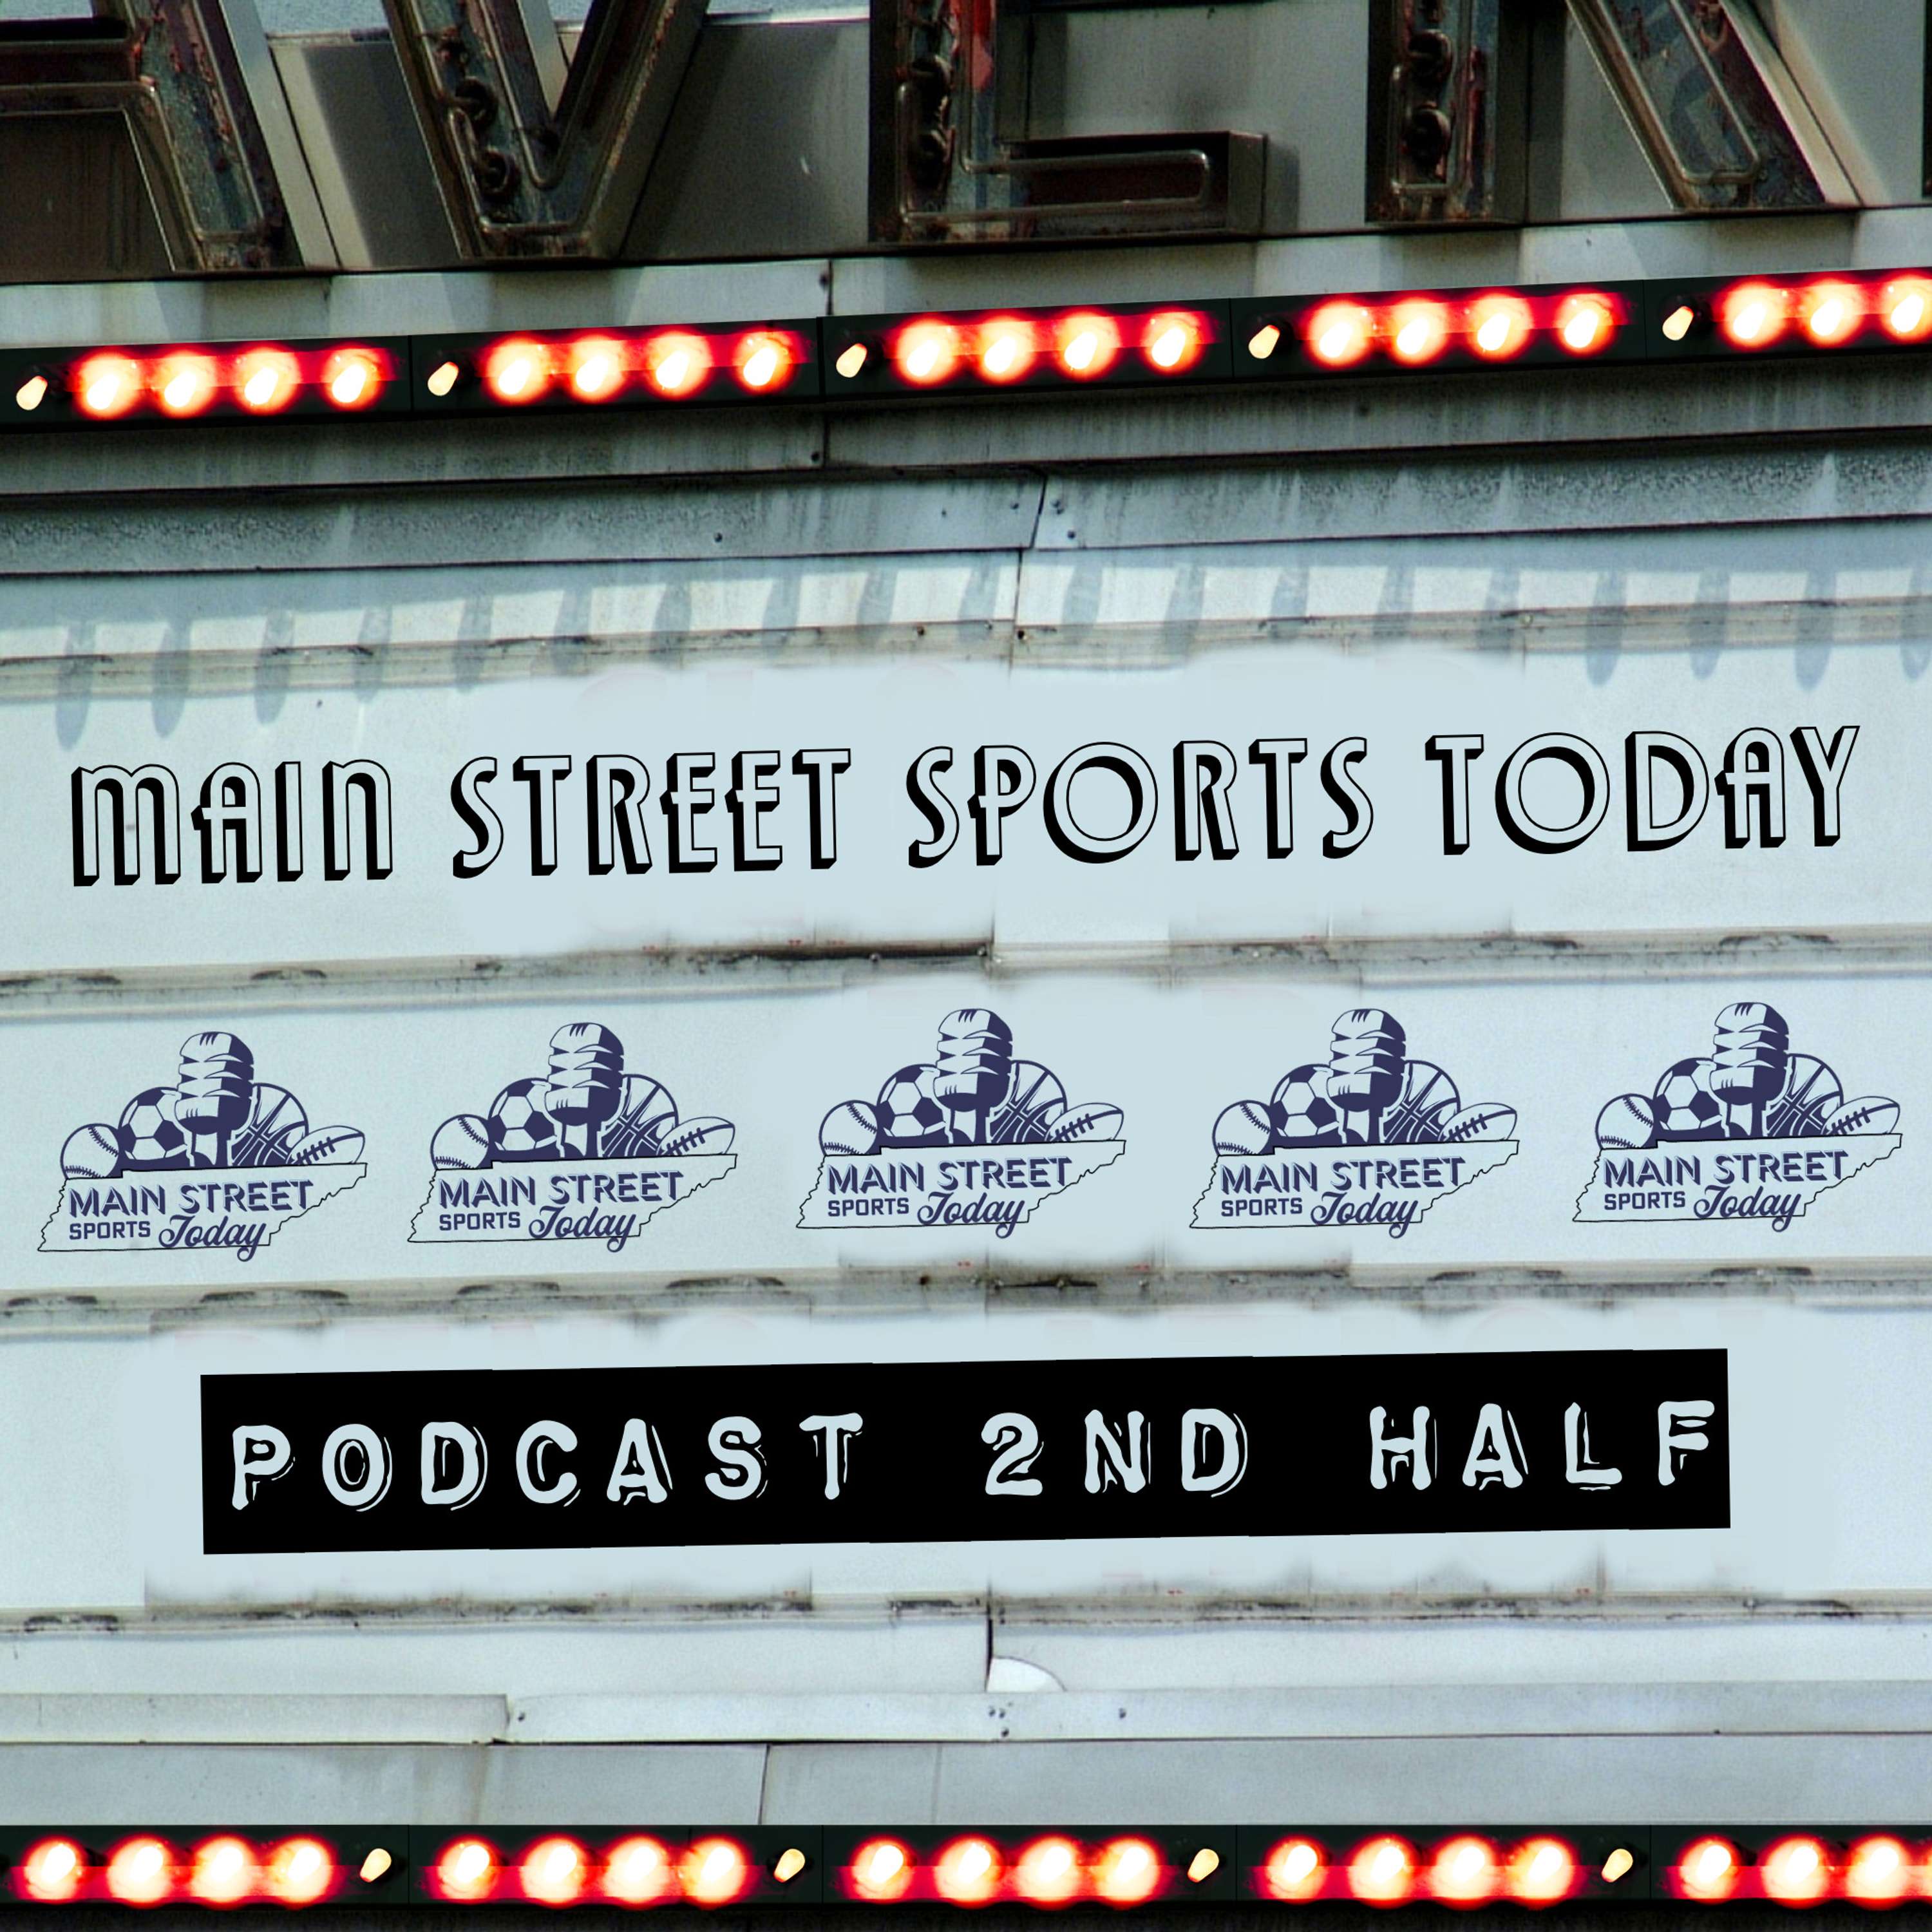 Main Street Sports Today 2nd Half podcast show image